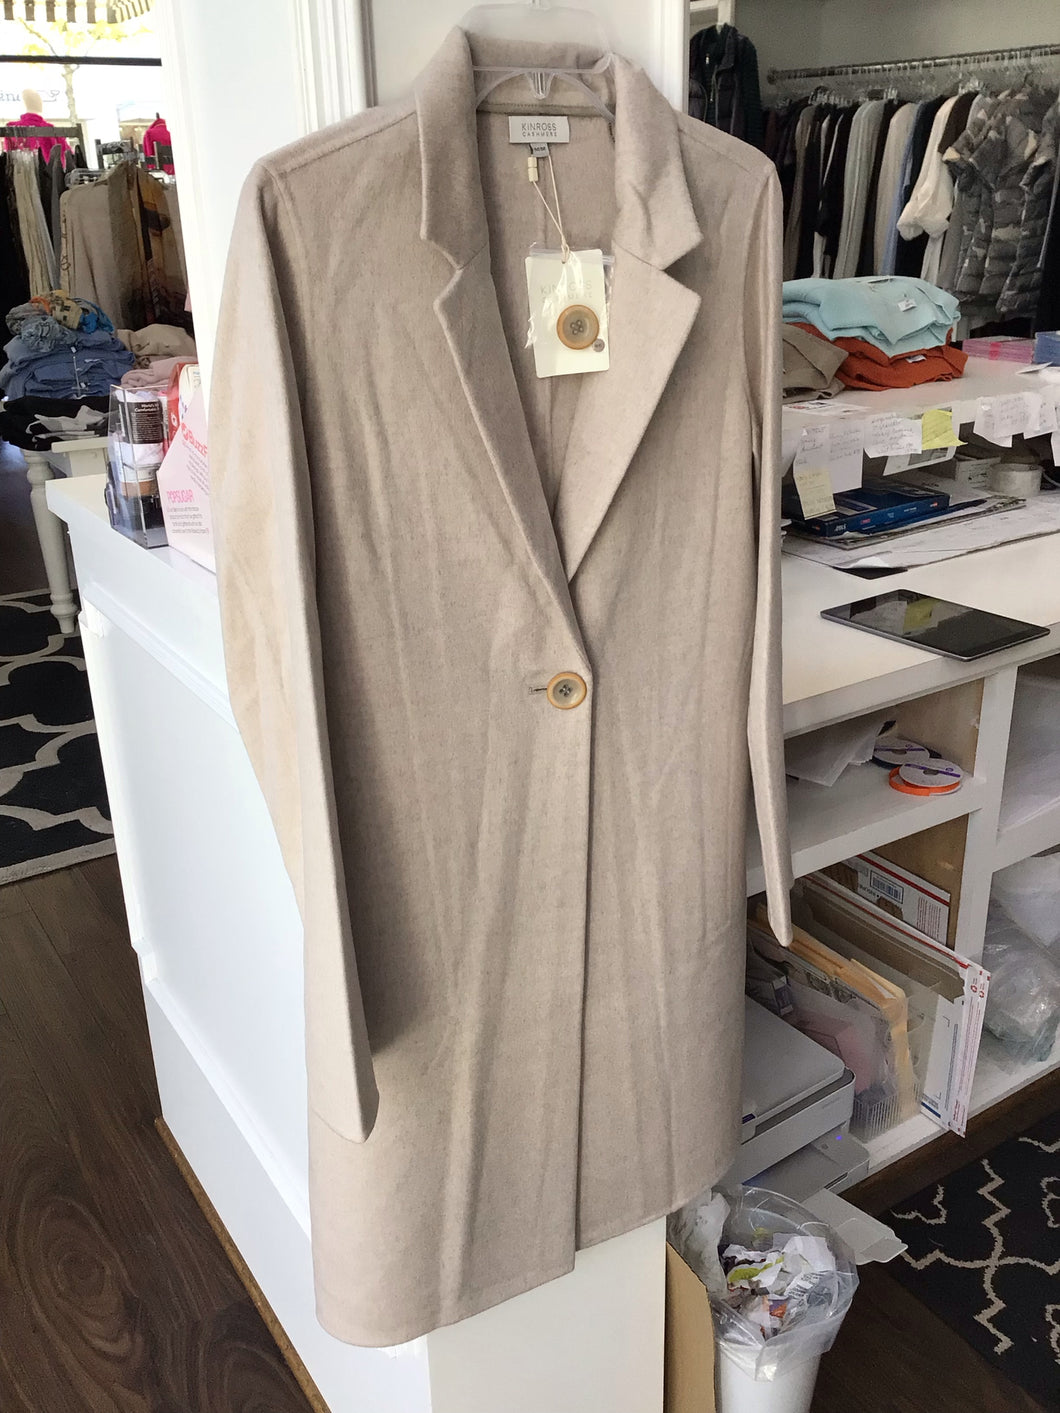 Lt. Weight Long Notch Collar Jacket in Biscotti by Kinross Cashmere